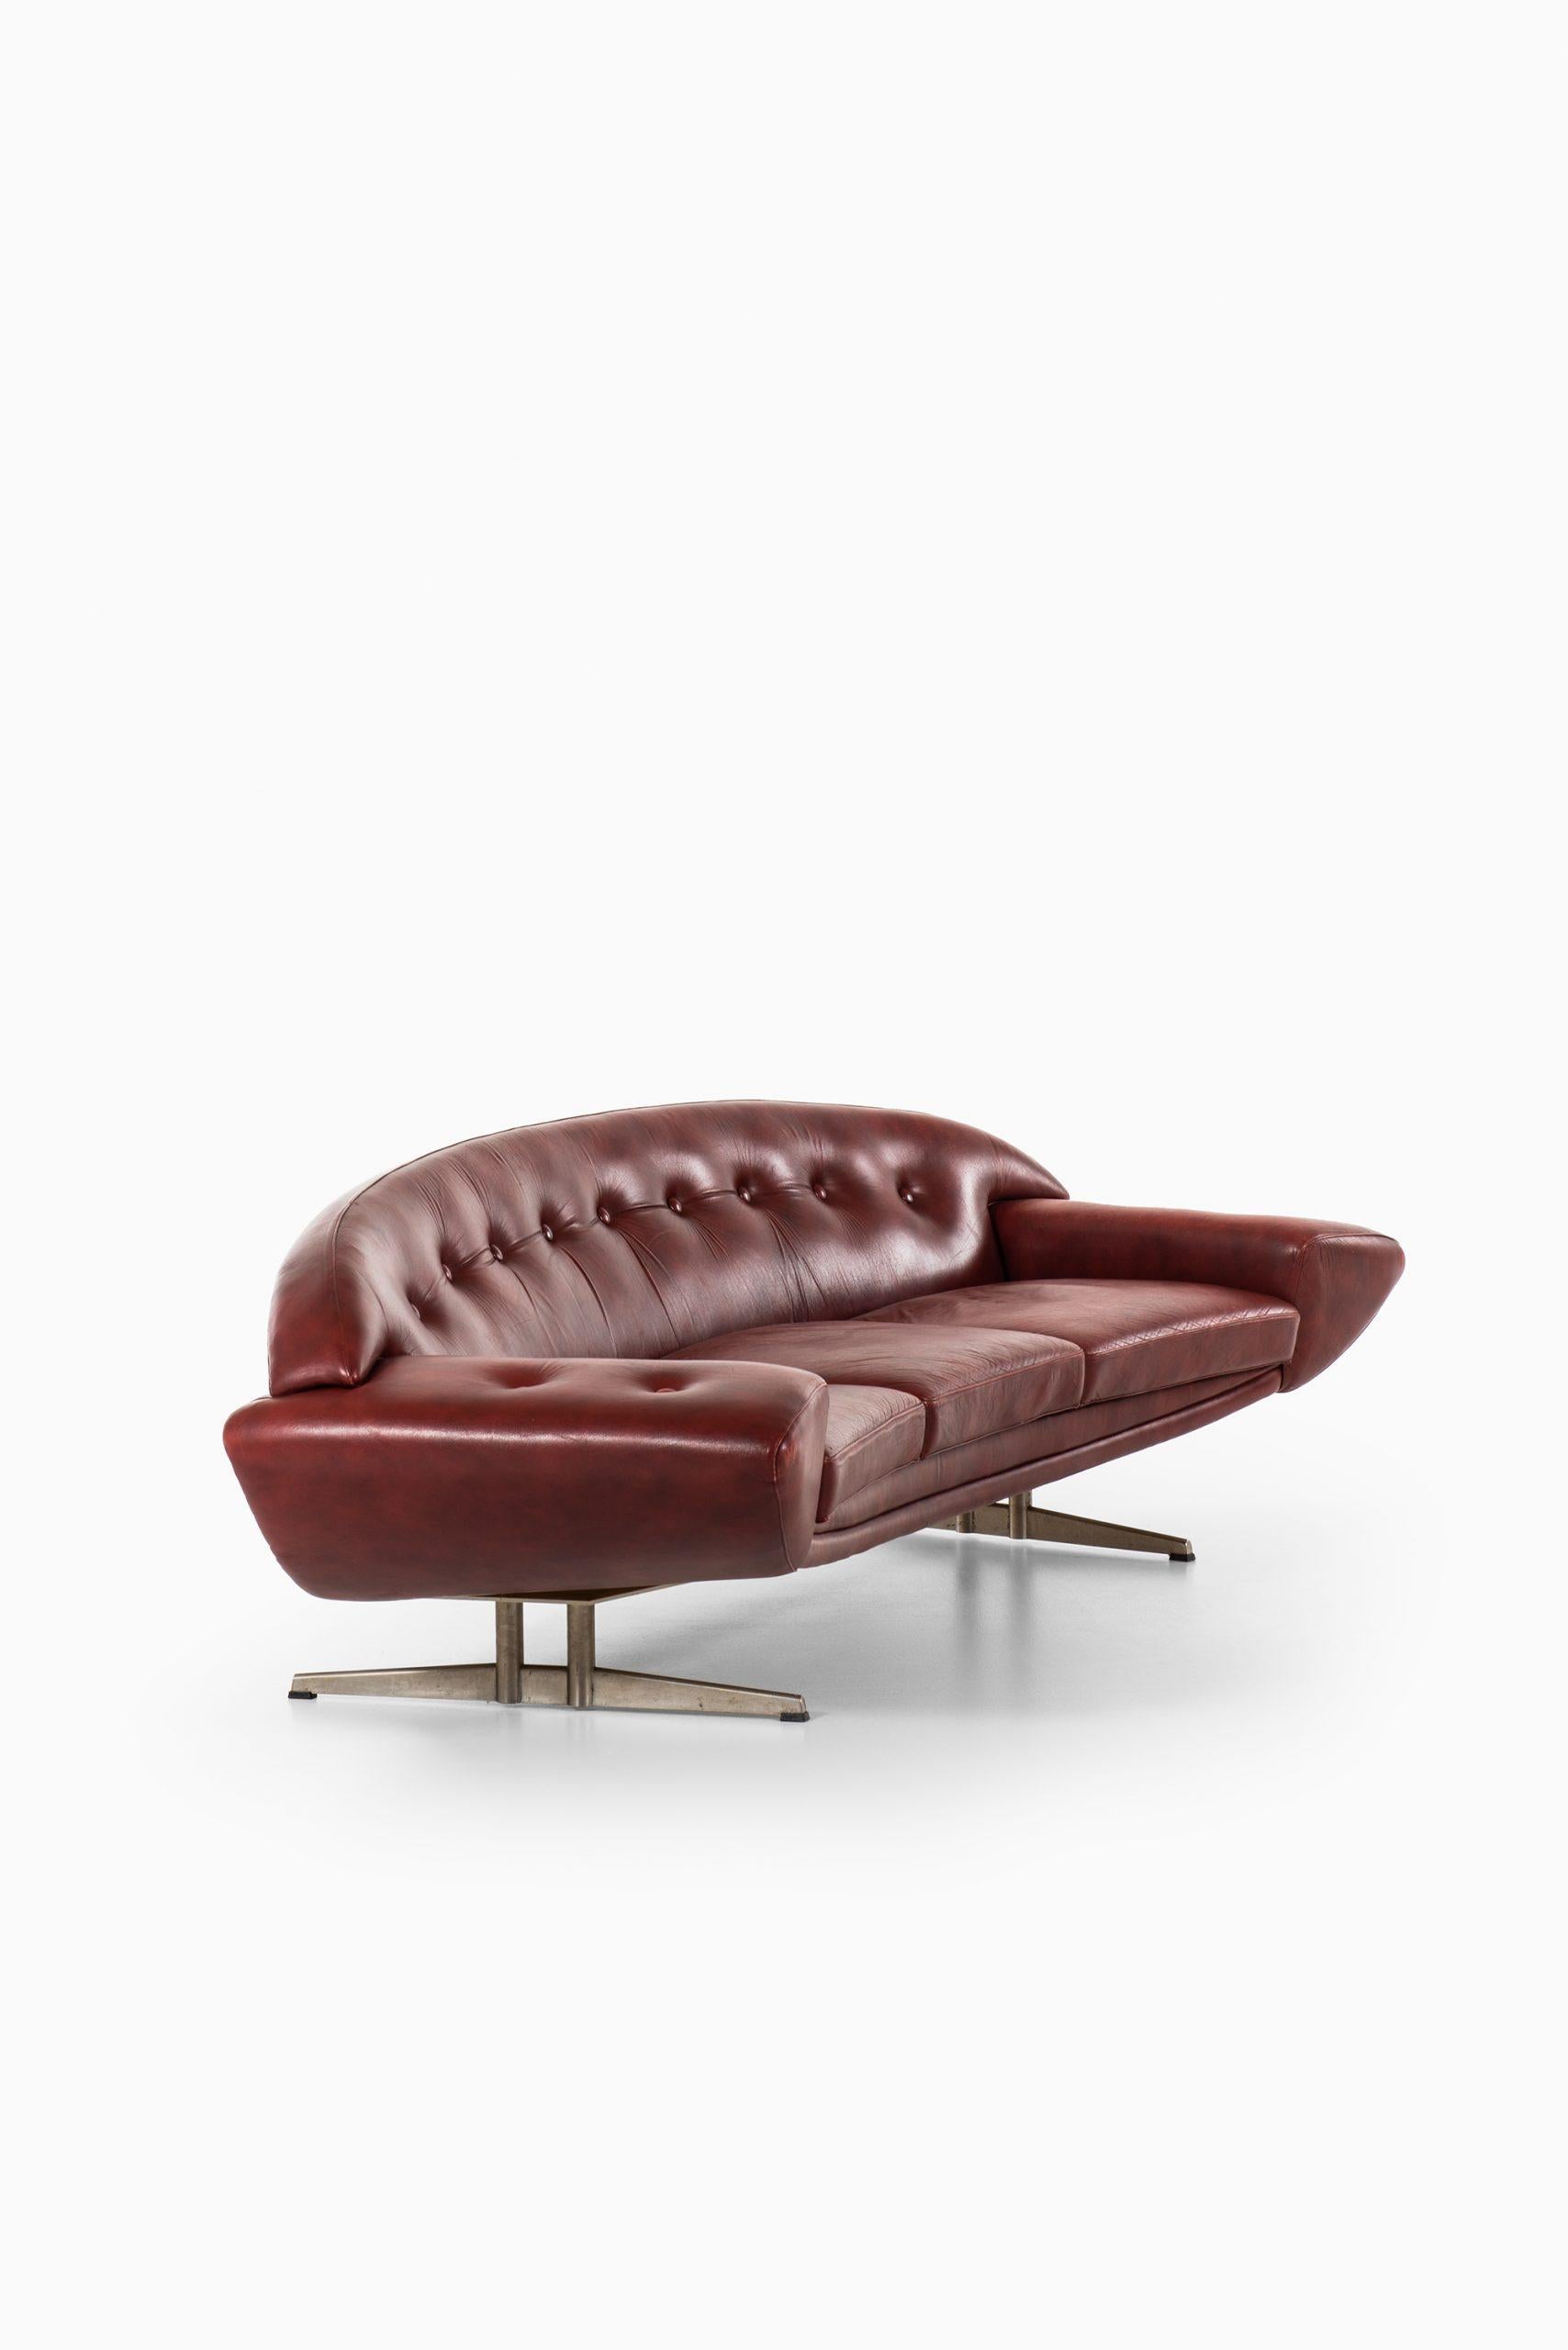 Mid-20th Century Johannes Andersen Sofa Model Capri Produced by Trensum in Sweden For Sale